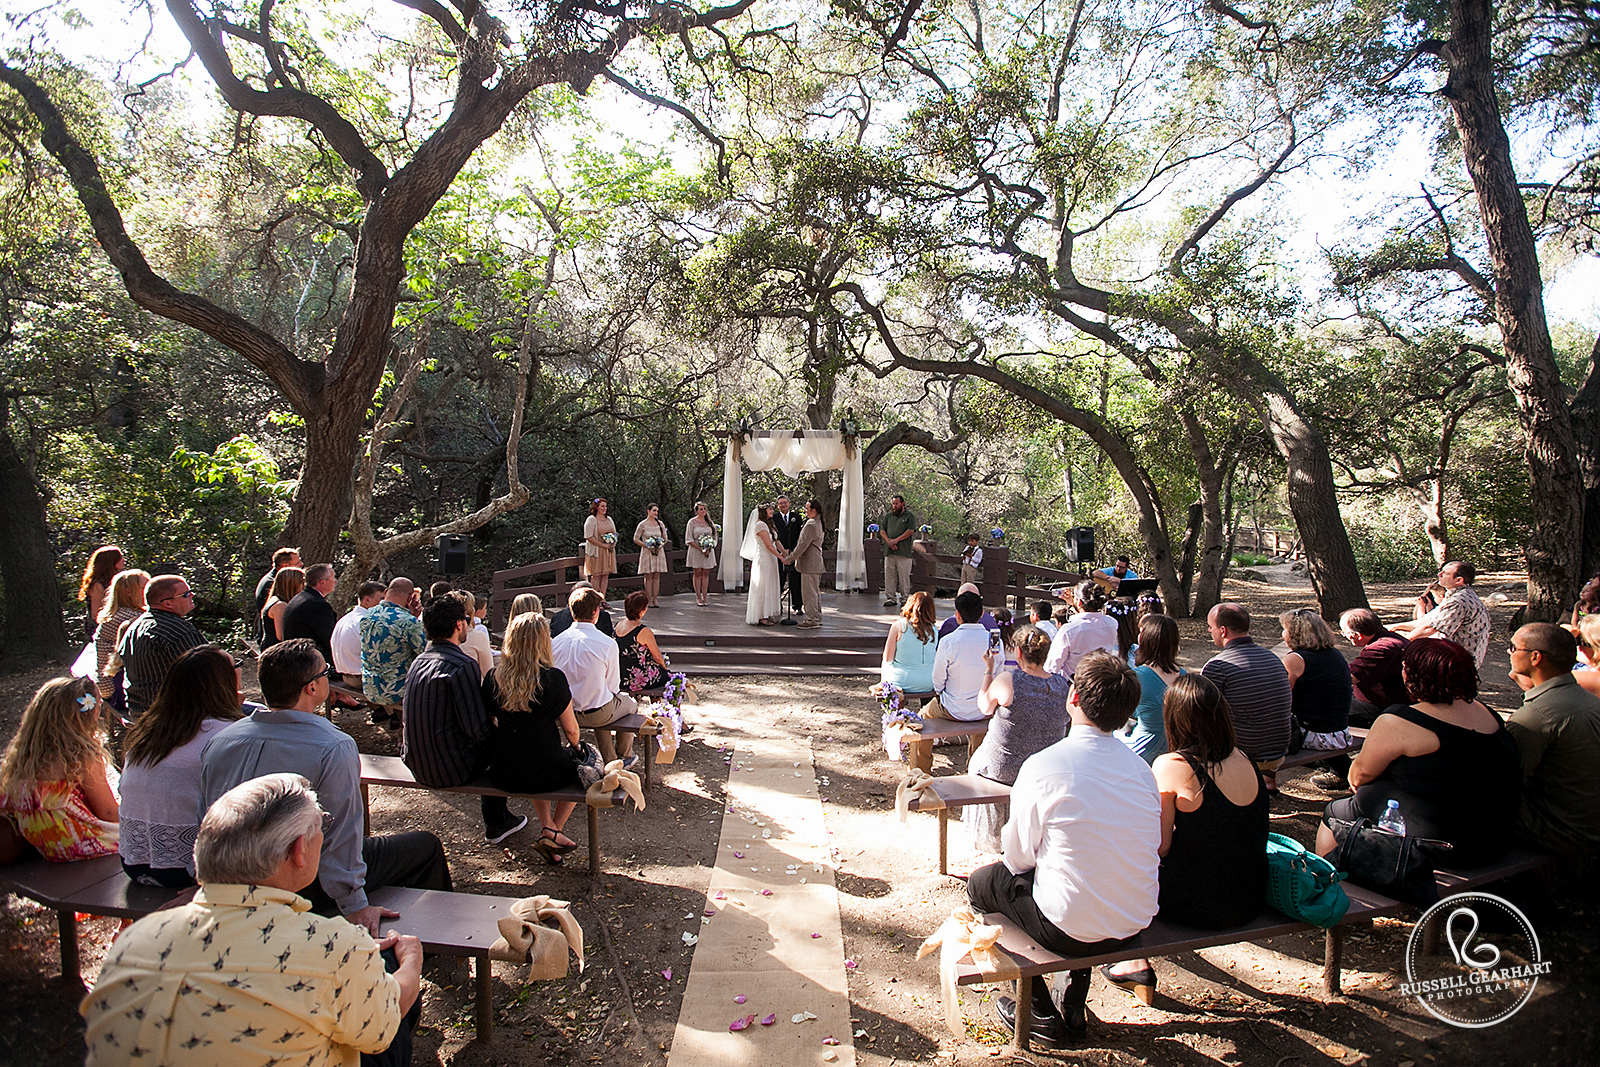 Oak Canyon Nature Center Wedding Ceremony: Orange County, CA – Russell Gearhart Photography – www.gearhartphoto.com  